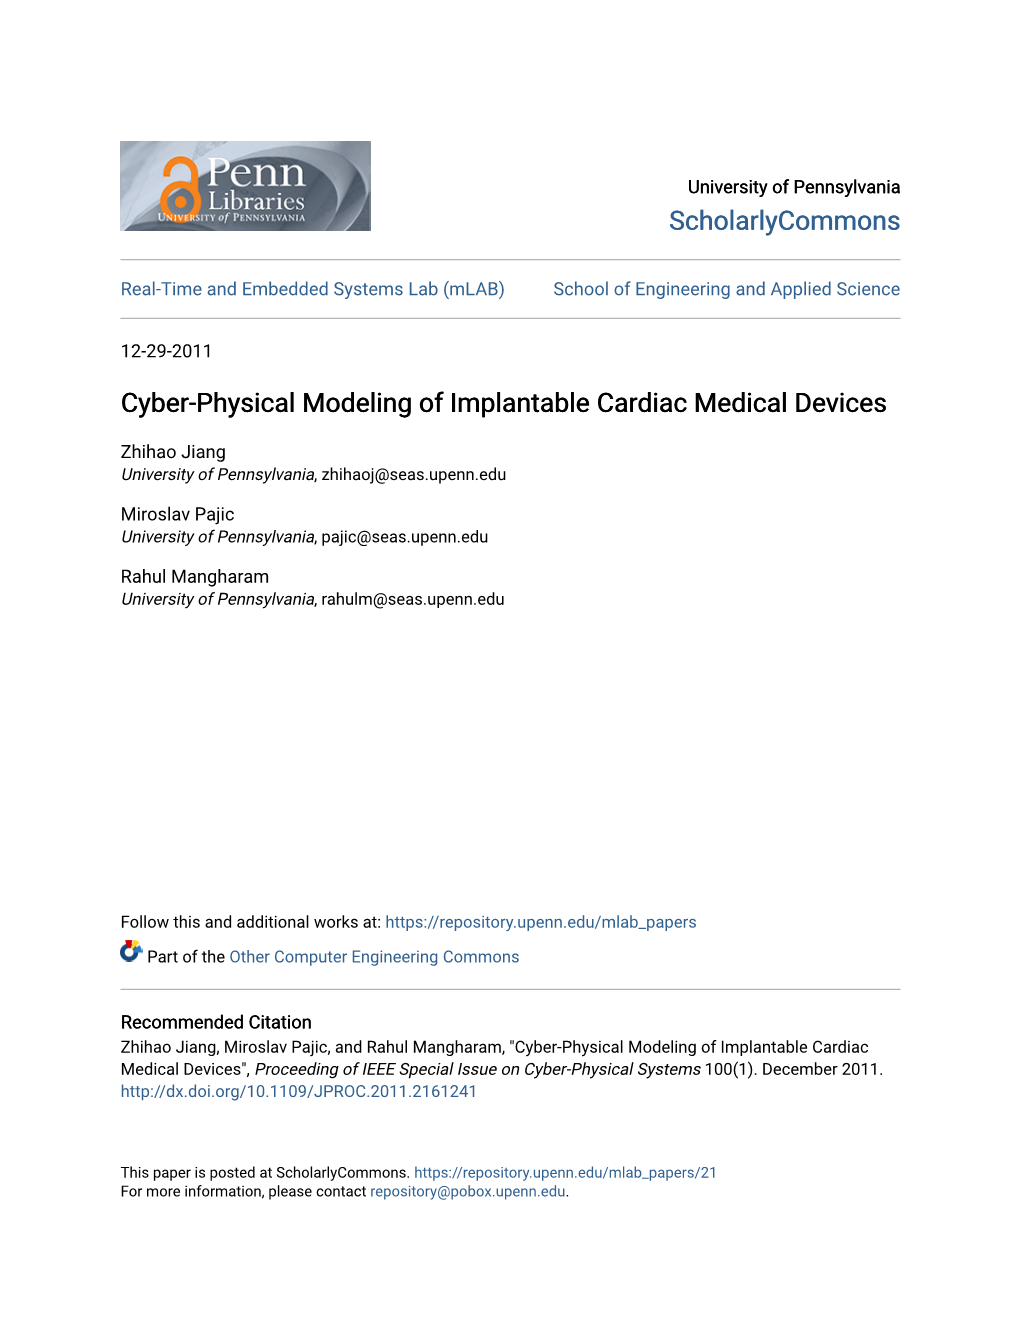 Cyber-Physical Modeling of Implantable Cardiac Medical Devices